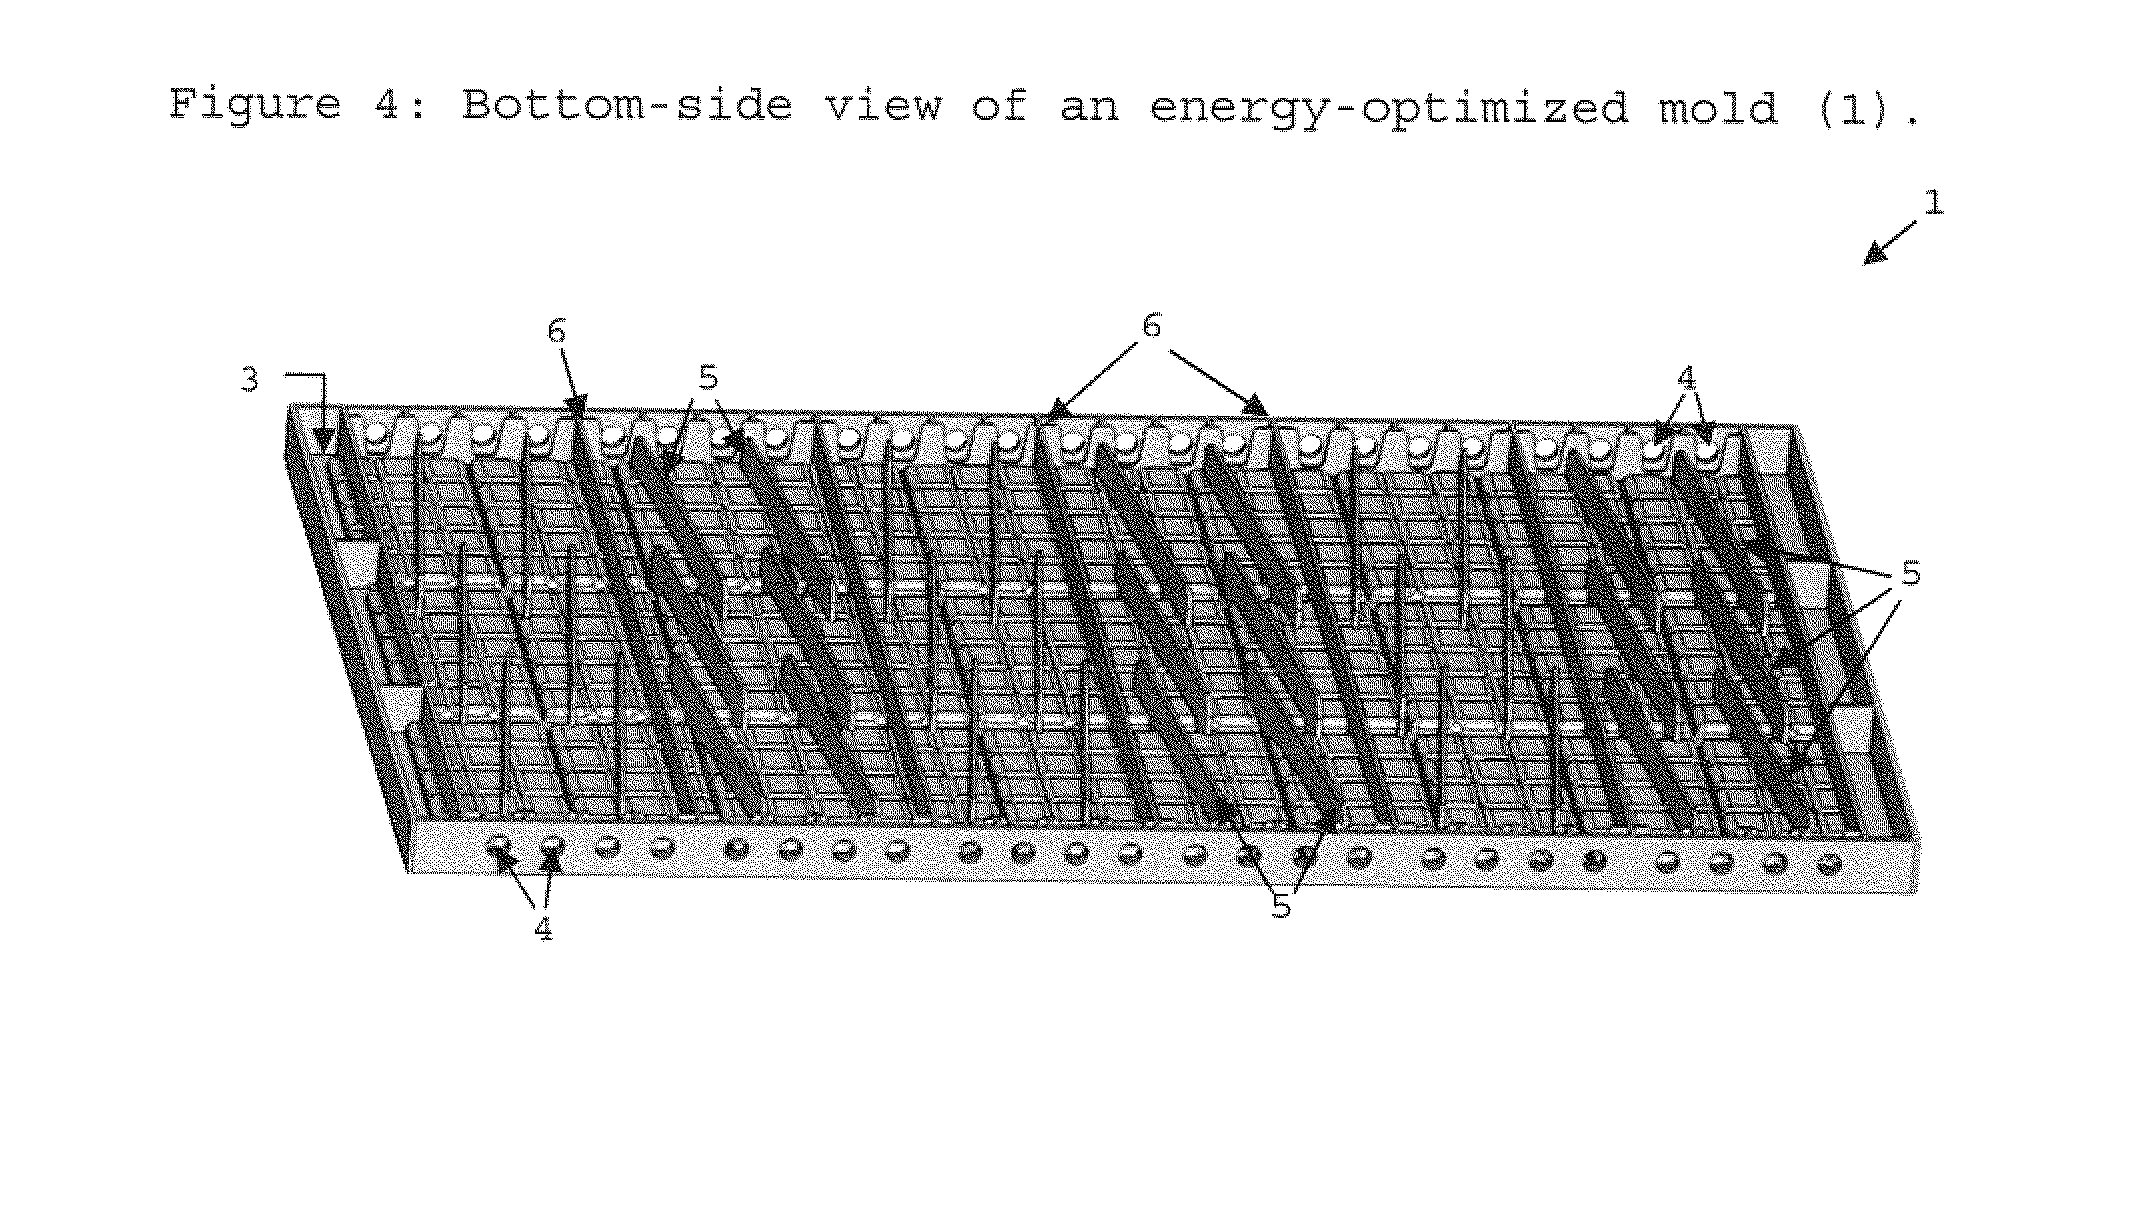 Mold with optimized heat transfer properties